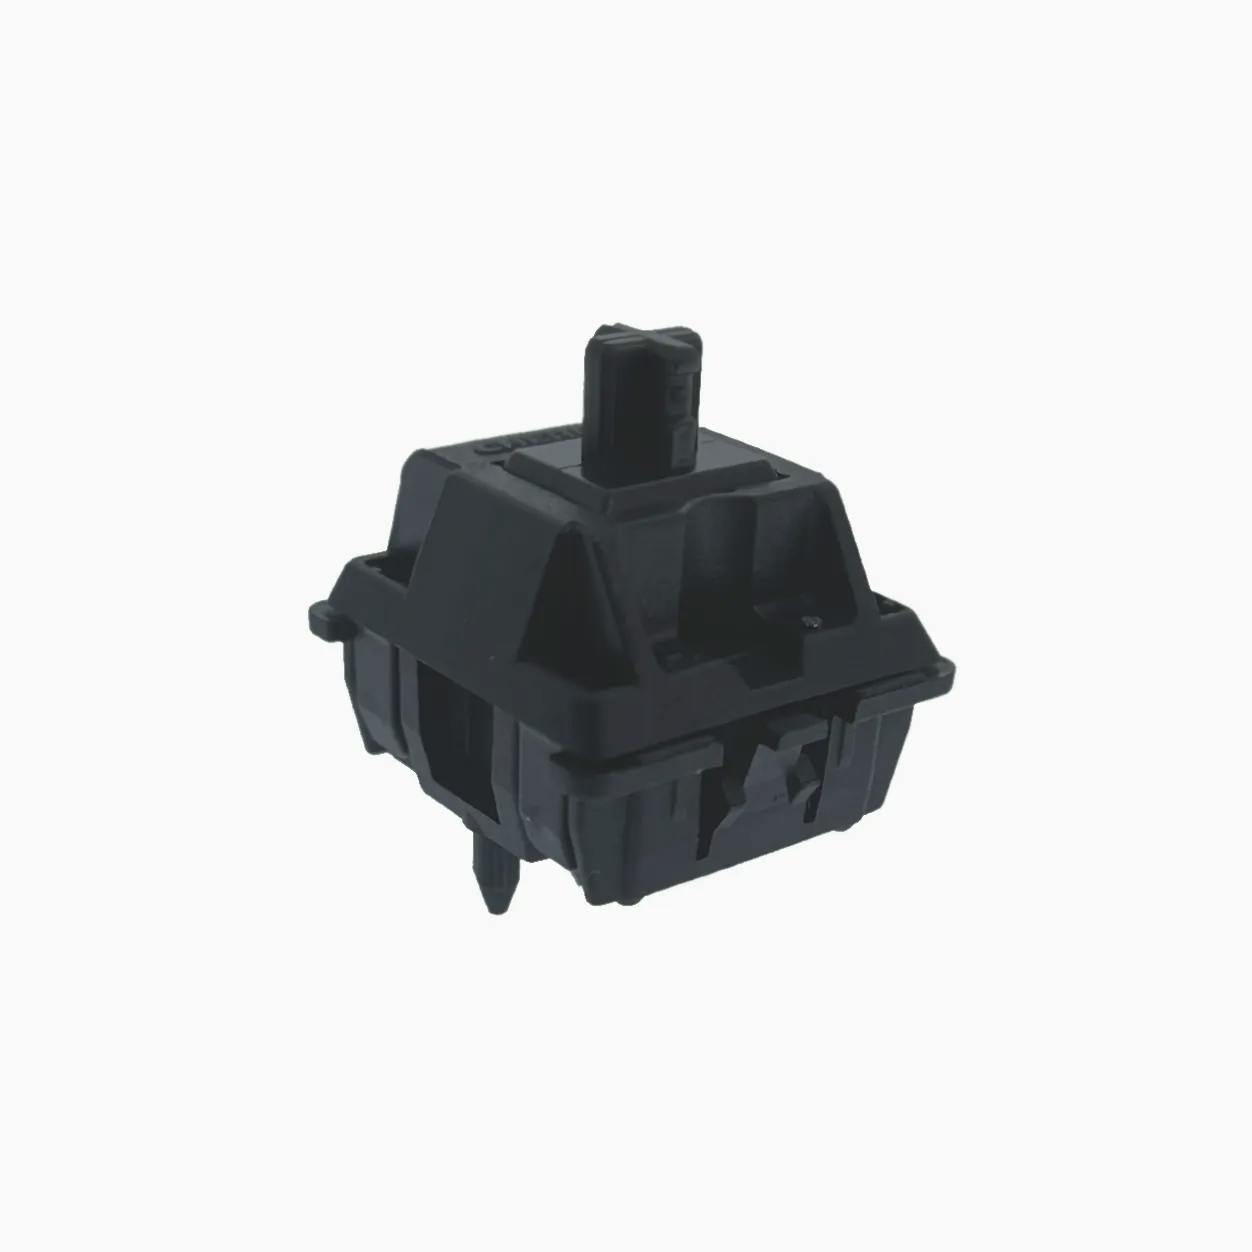 Image for Cherry MX Black Hyperglide Linear Switch